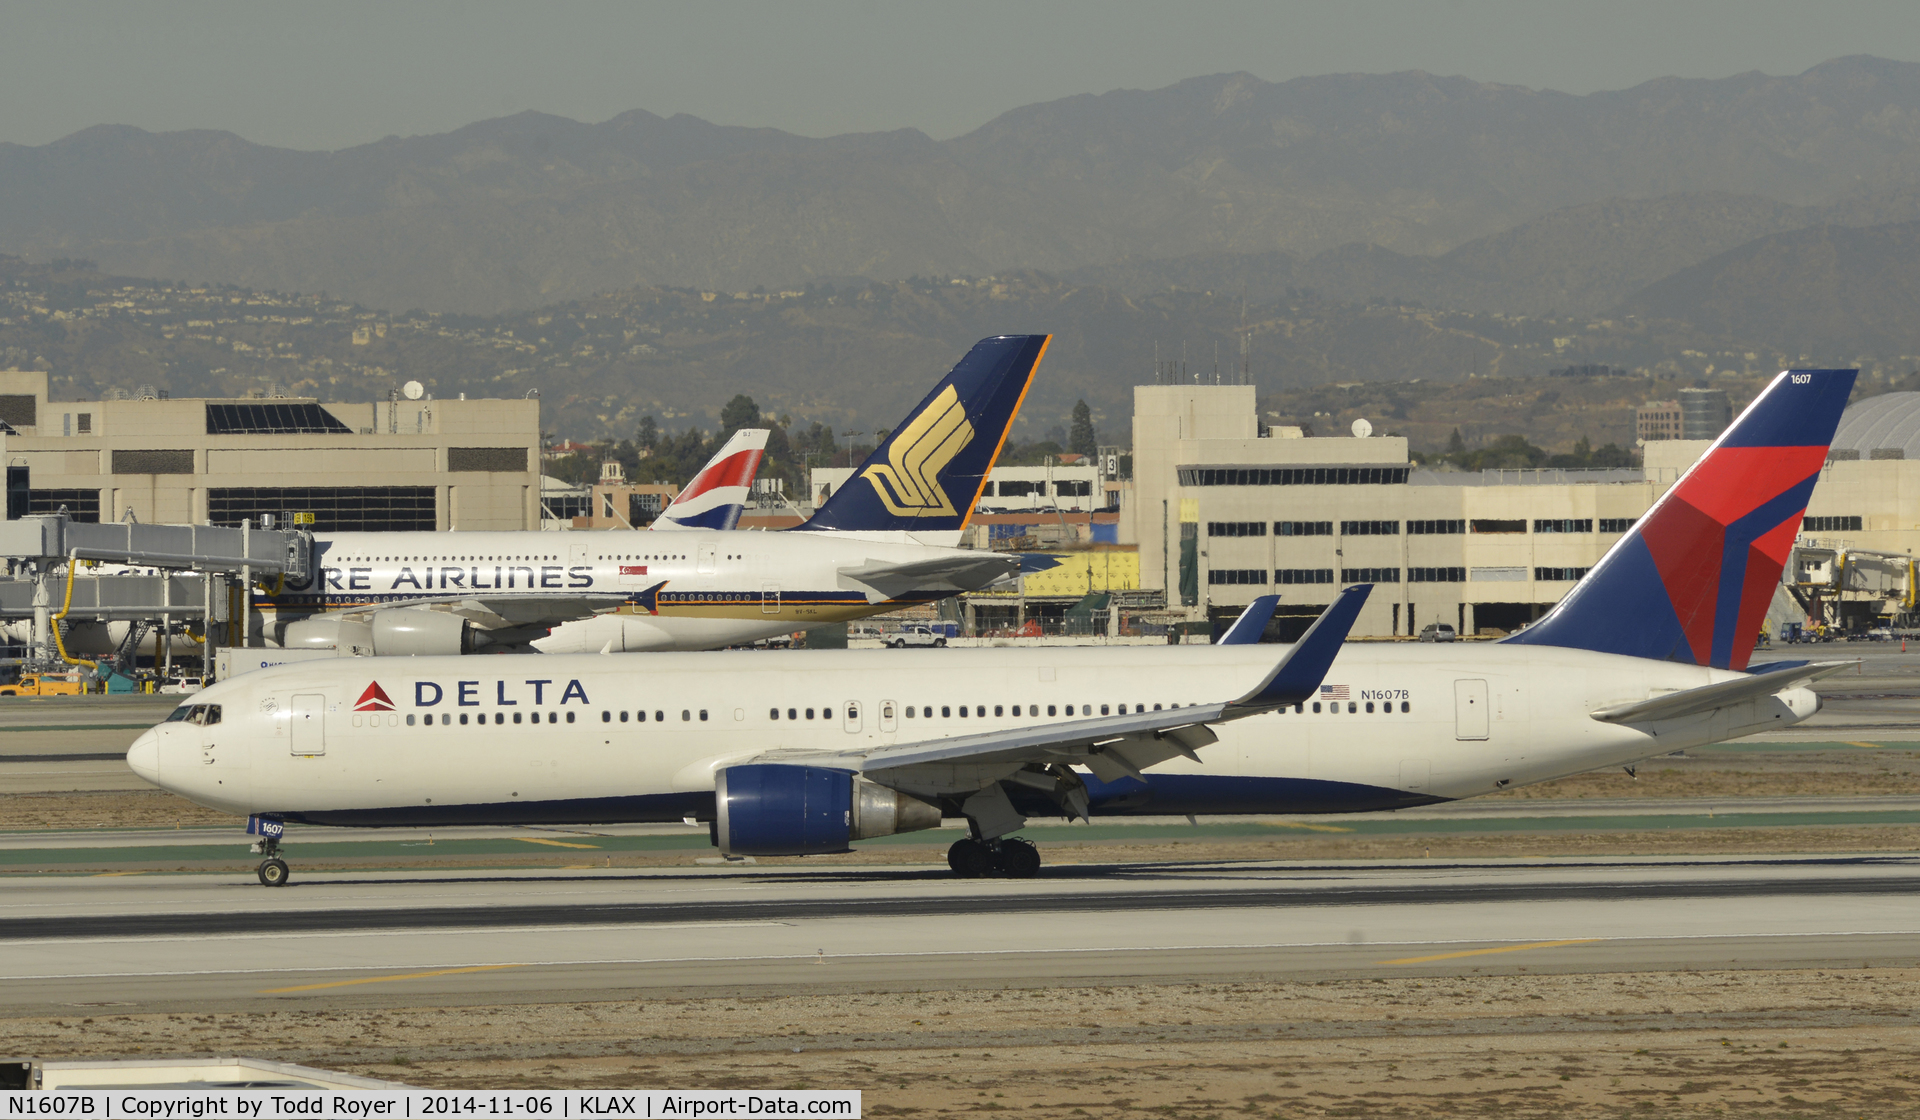 N1607B, 2000 Boeing 767-332 C/N 30388, Taxing to gate at LAX